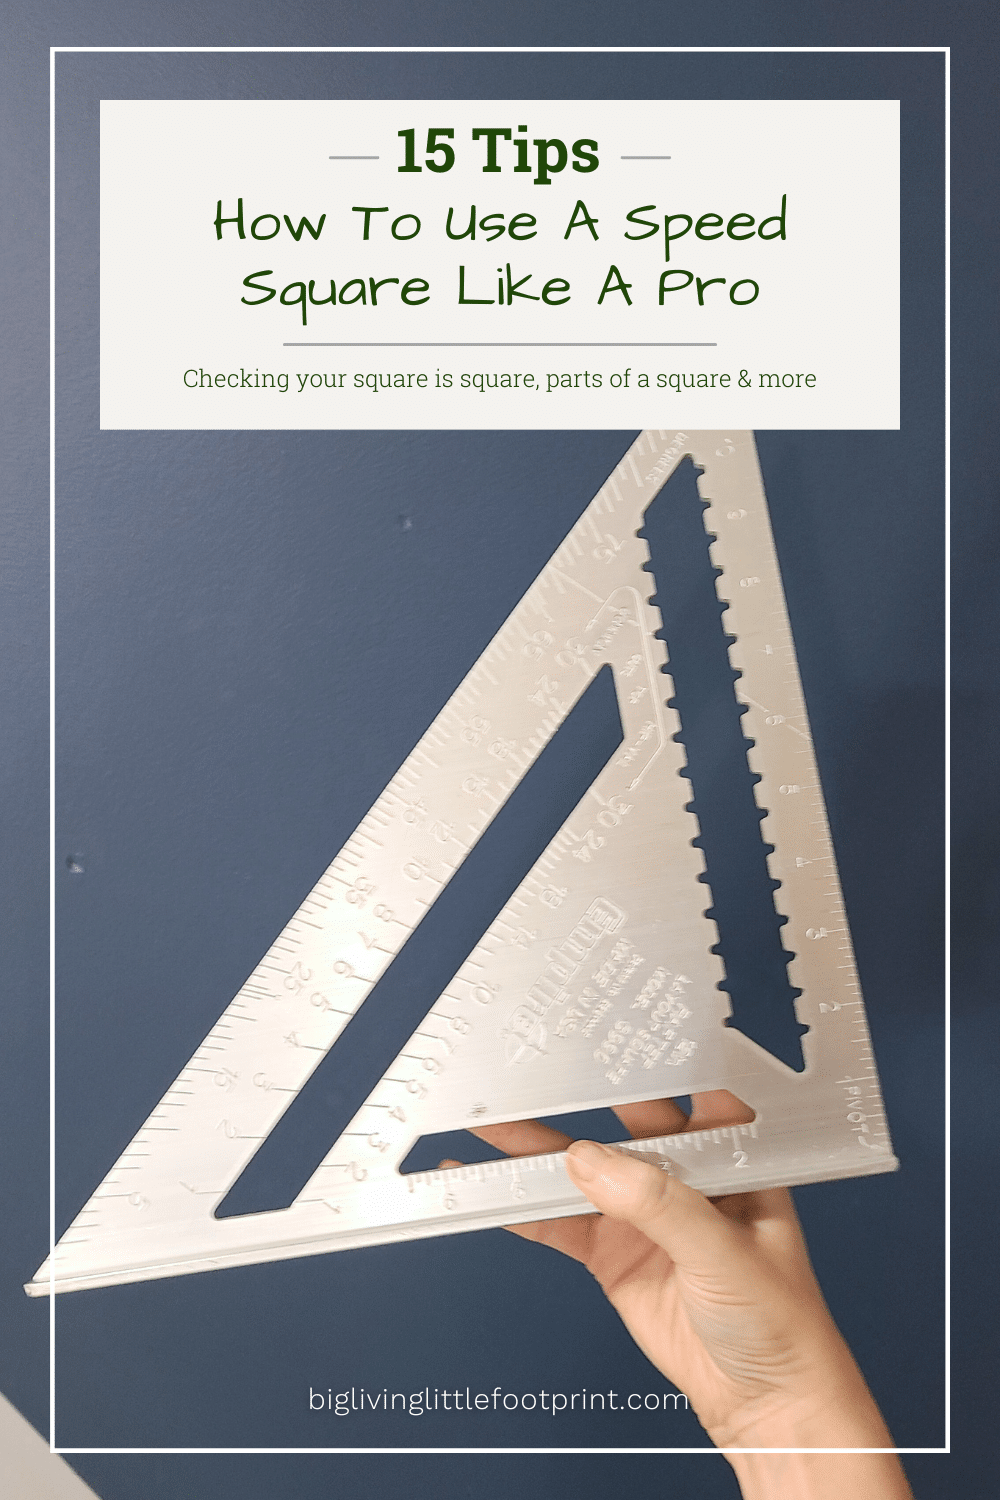 Hand holding up a speed square - 15 tips on how to use a speed square like a pro